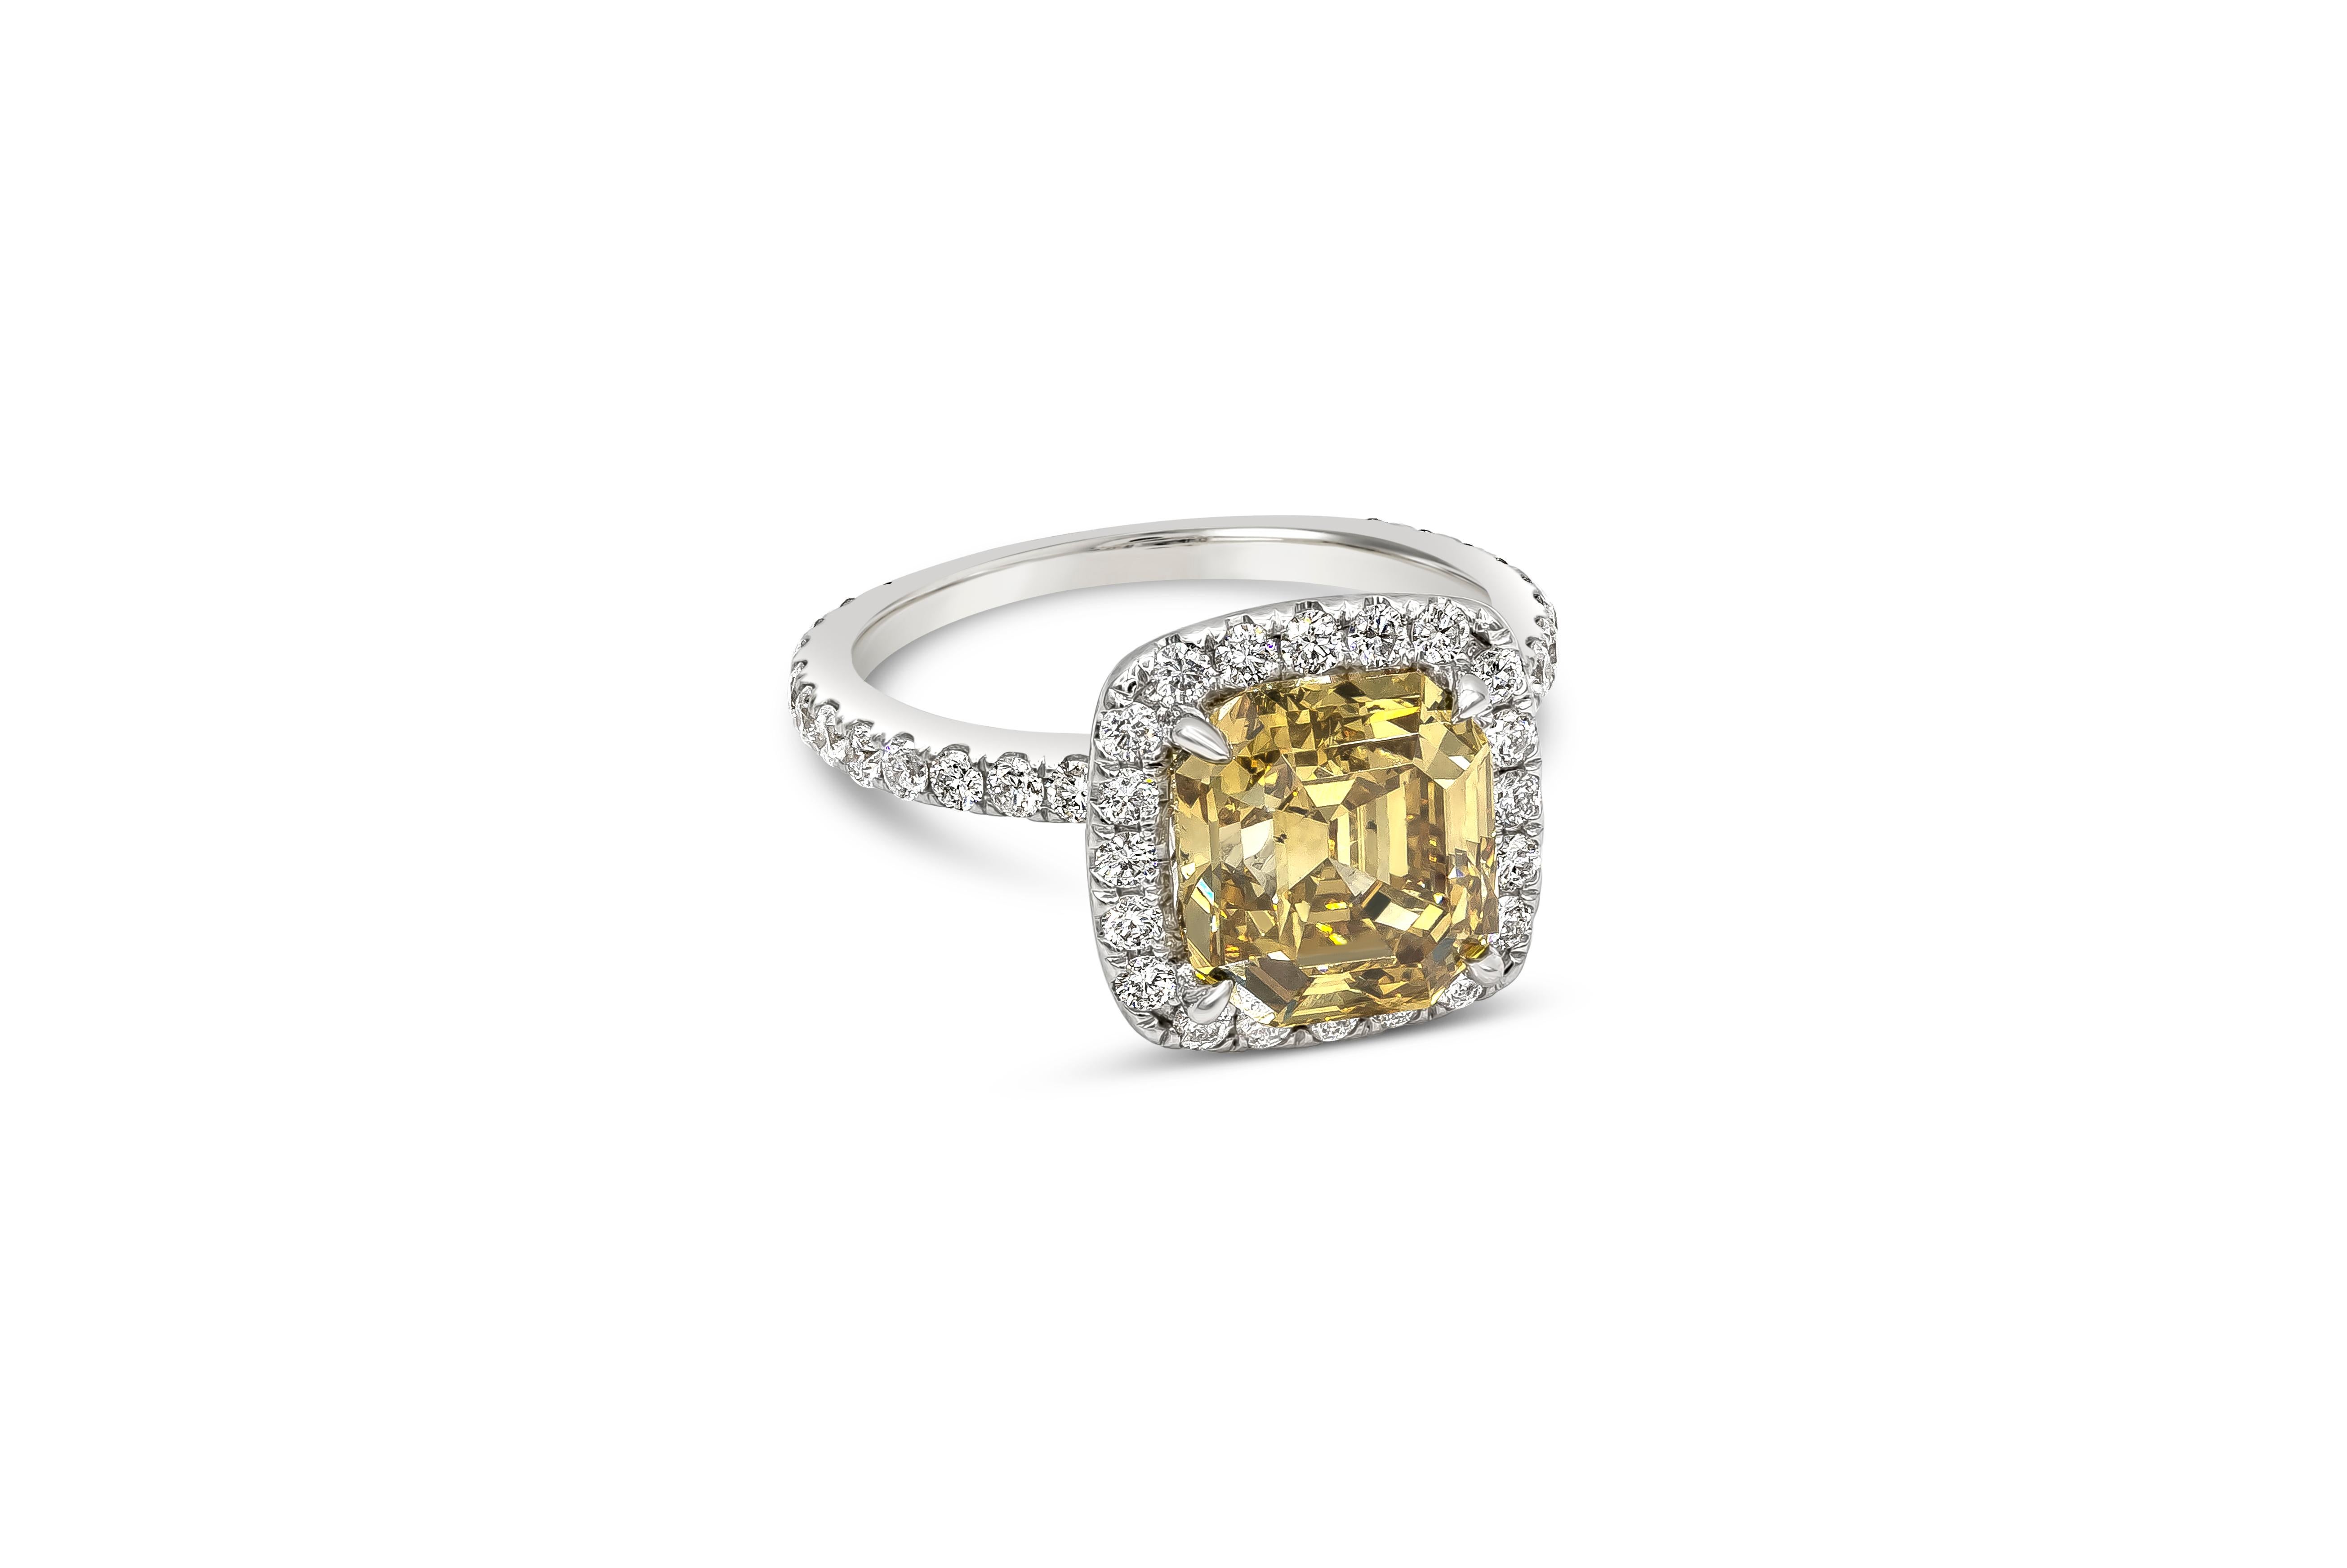 This elegant and luxurious engagement ring featuring 4.27 carat square asscher cut diamond certified by GIA as fancy deep brownish yellow color, SI1 clarity. Surrounding the center are round brilliant diamonds in a polished platinum band. Accent